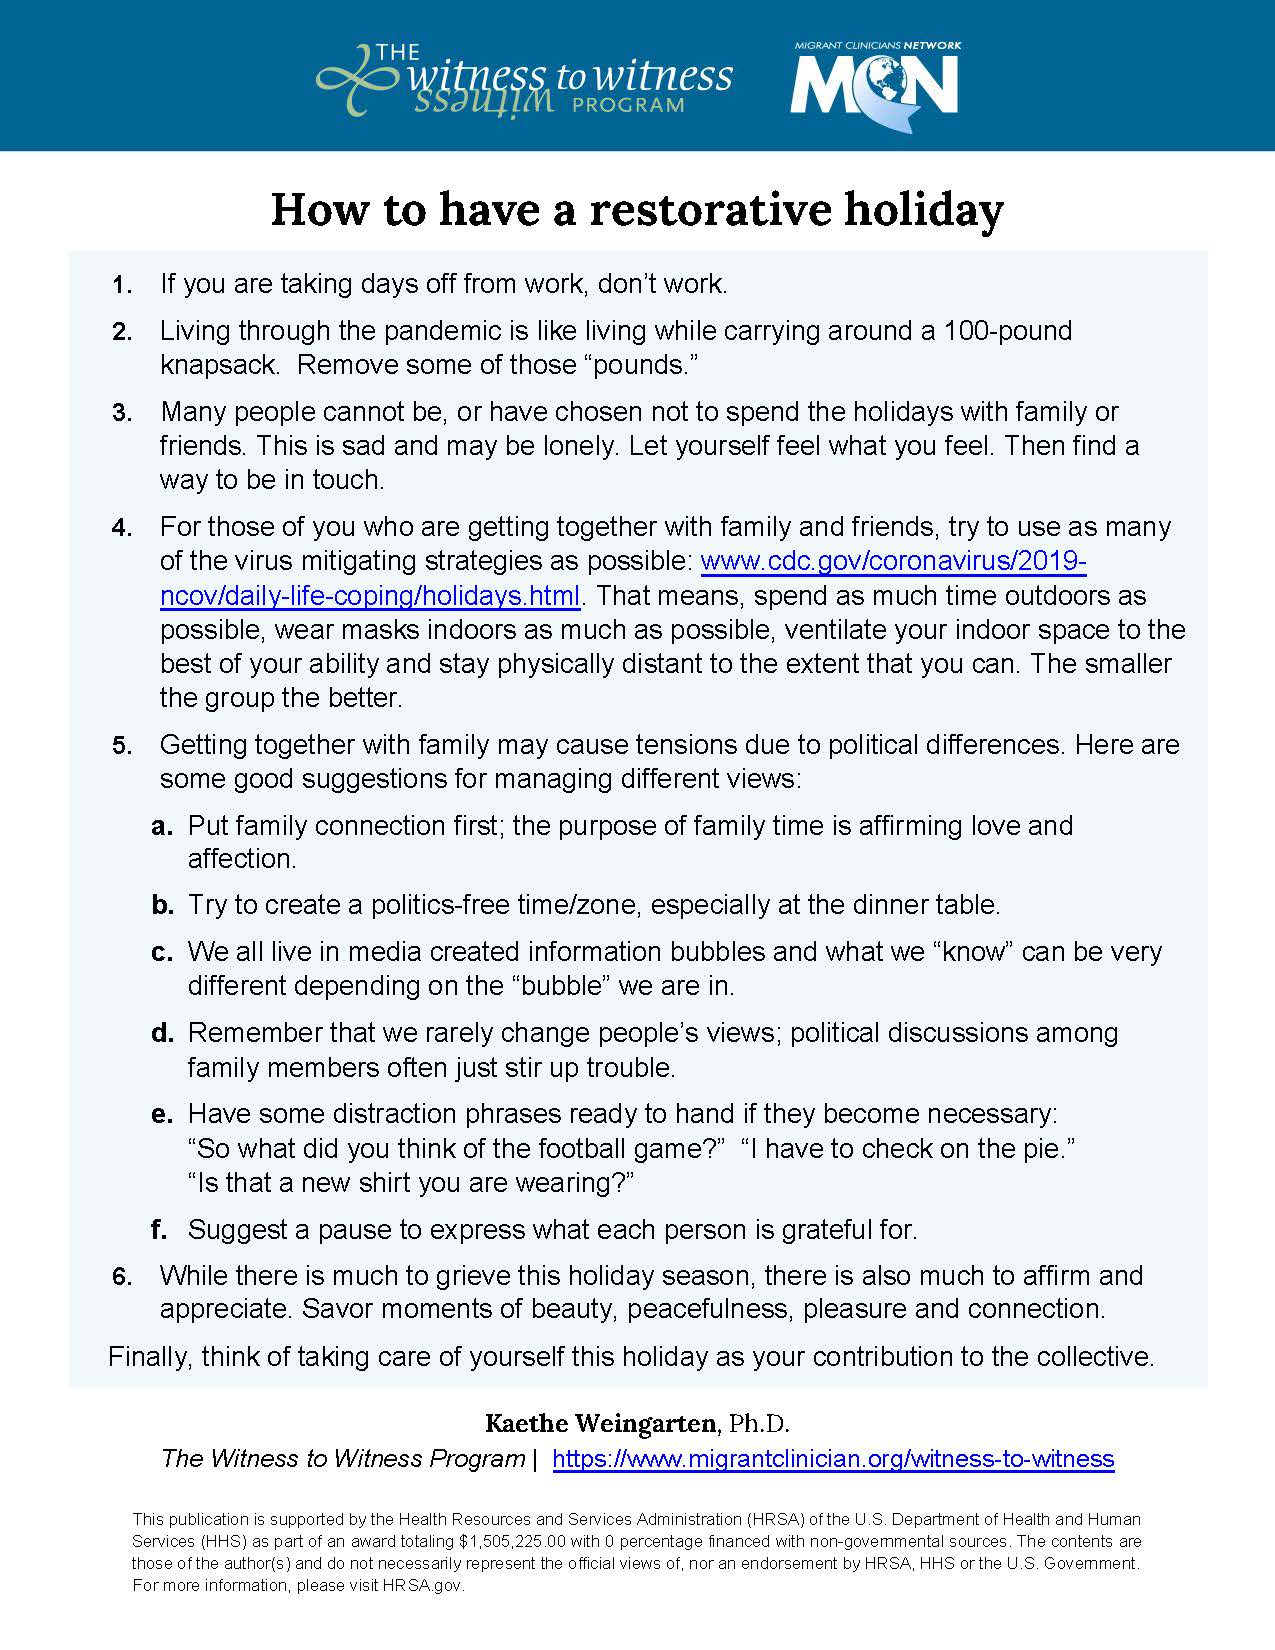 How to have a restorative Holiday